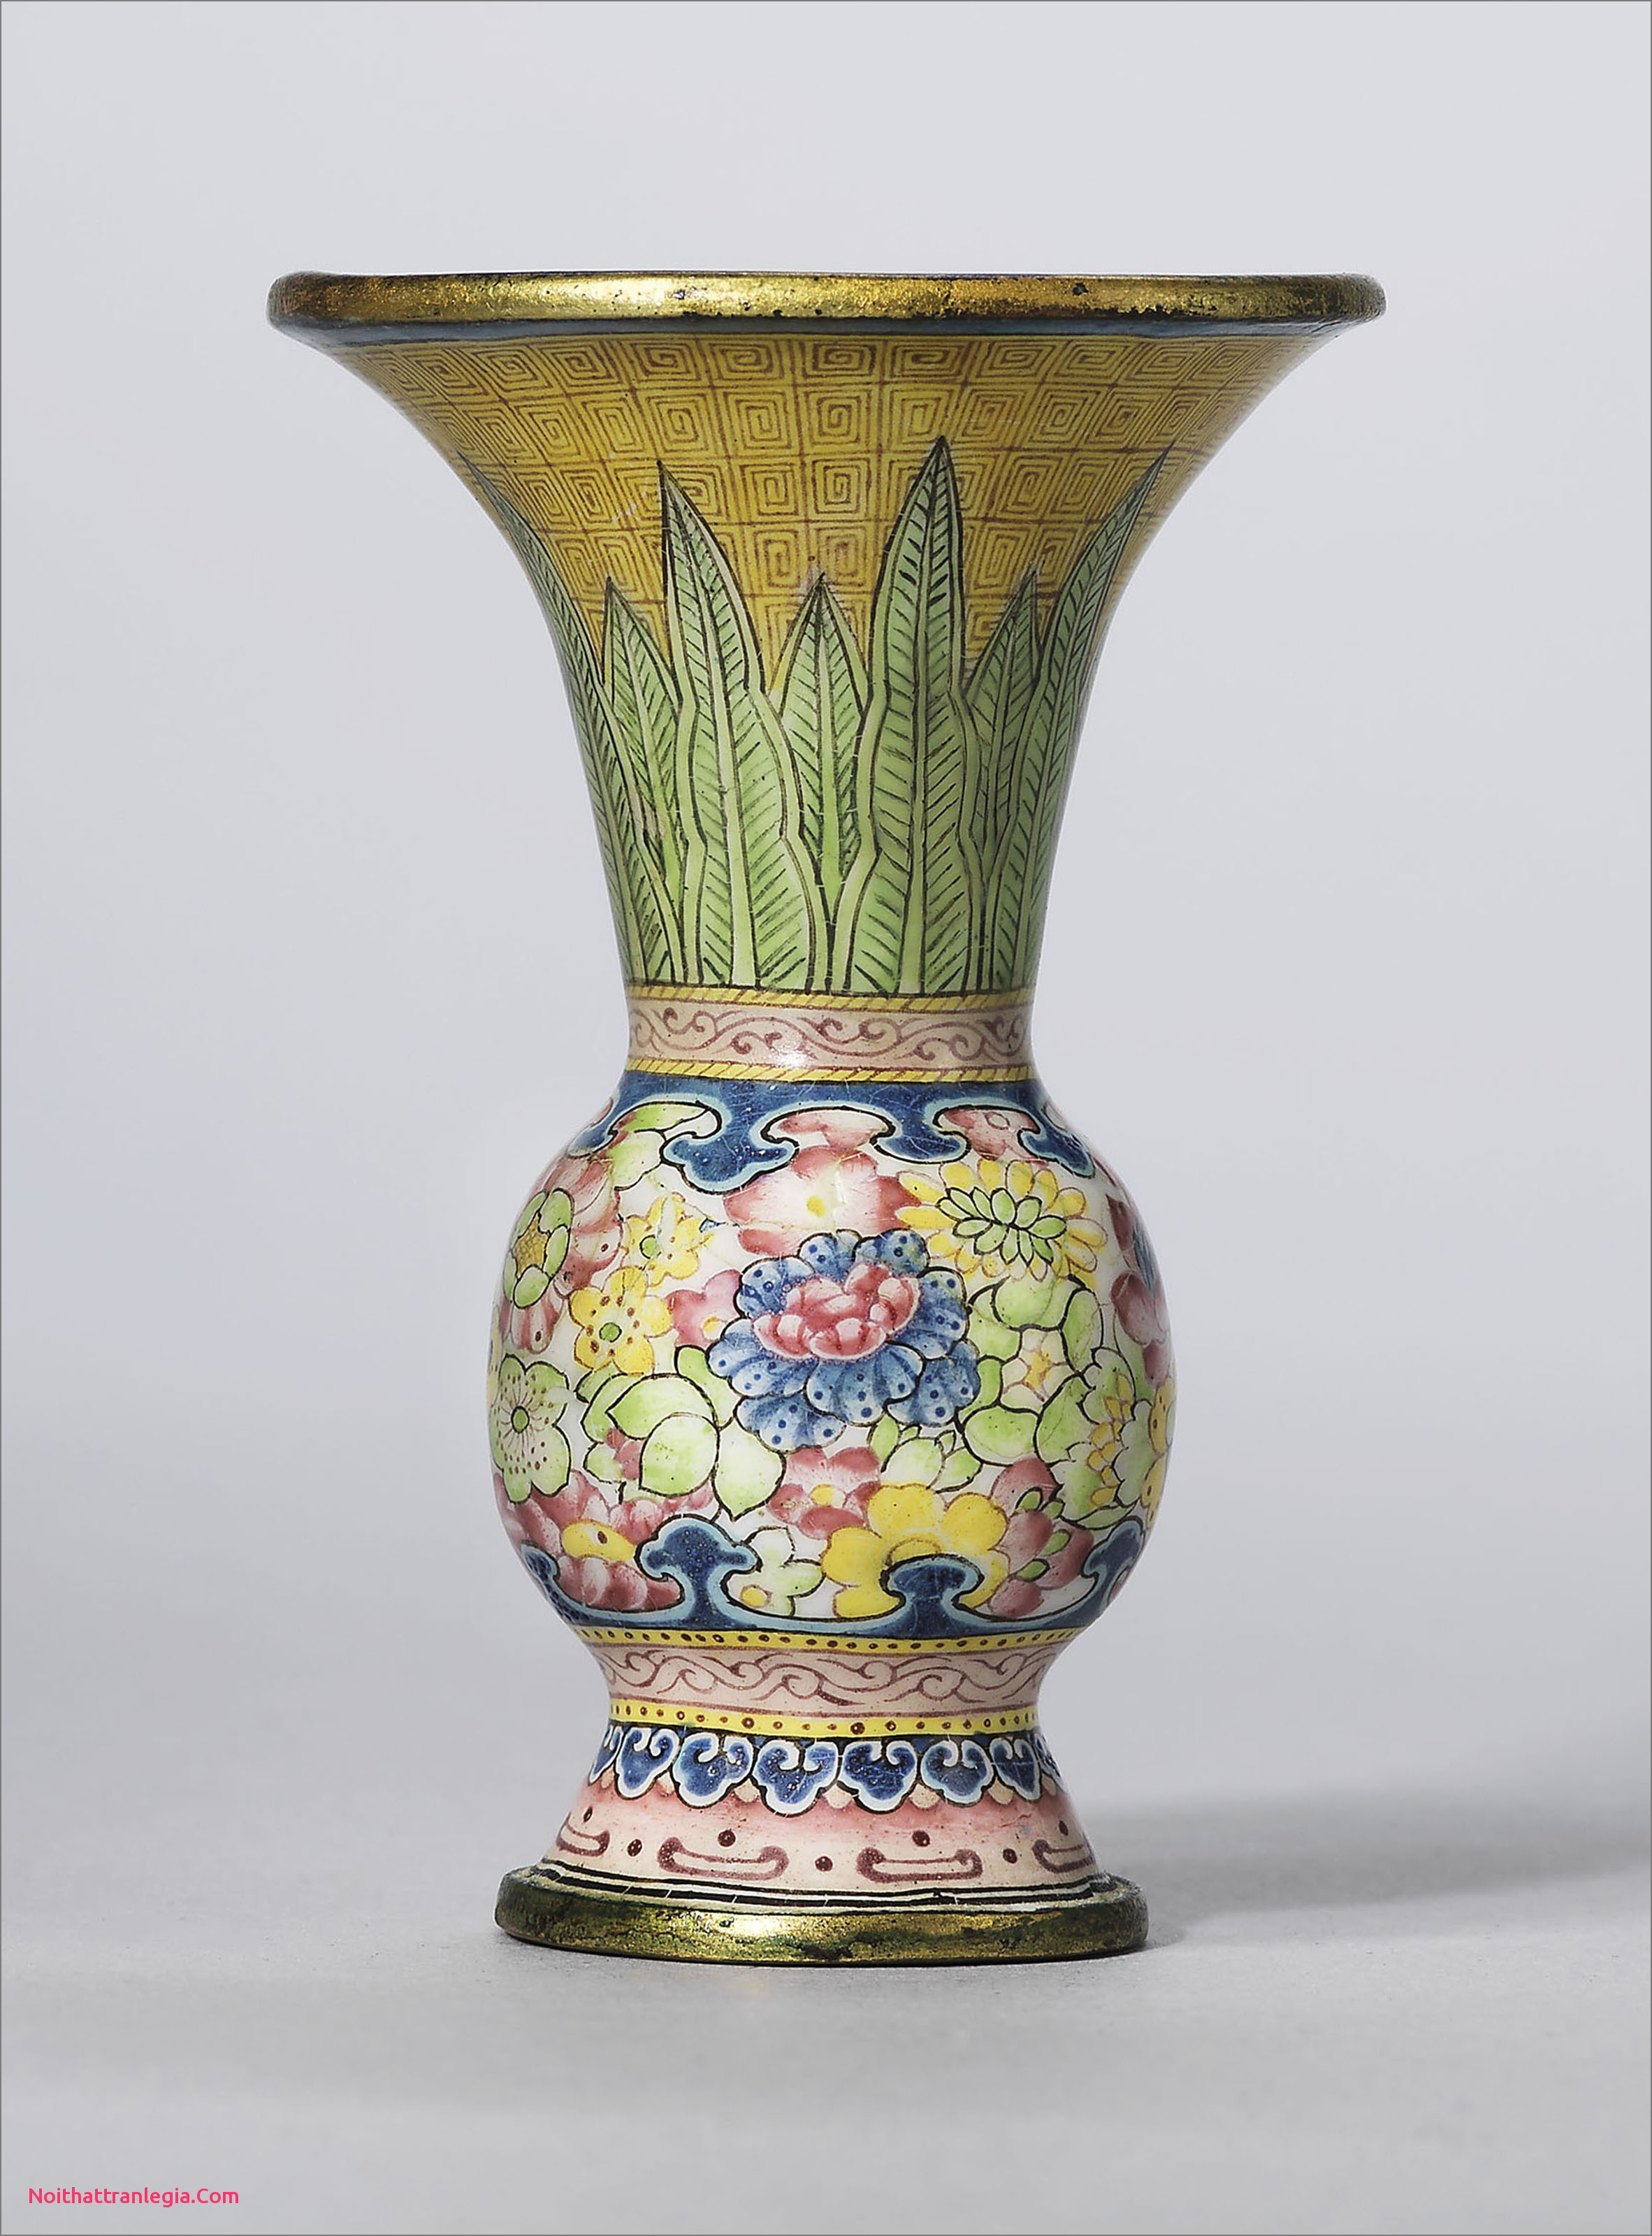 18 Recommended Large asian Vase 2024 free download large asian vase of 20 chinese antique vase noithattranlegia vases design pertaining to chinese antique vase unique a guide to the symbolism of flowers on chinese ceramics of chinese antique